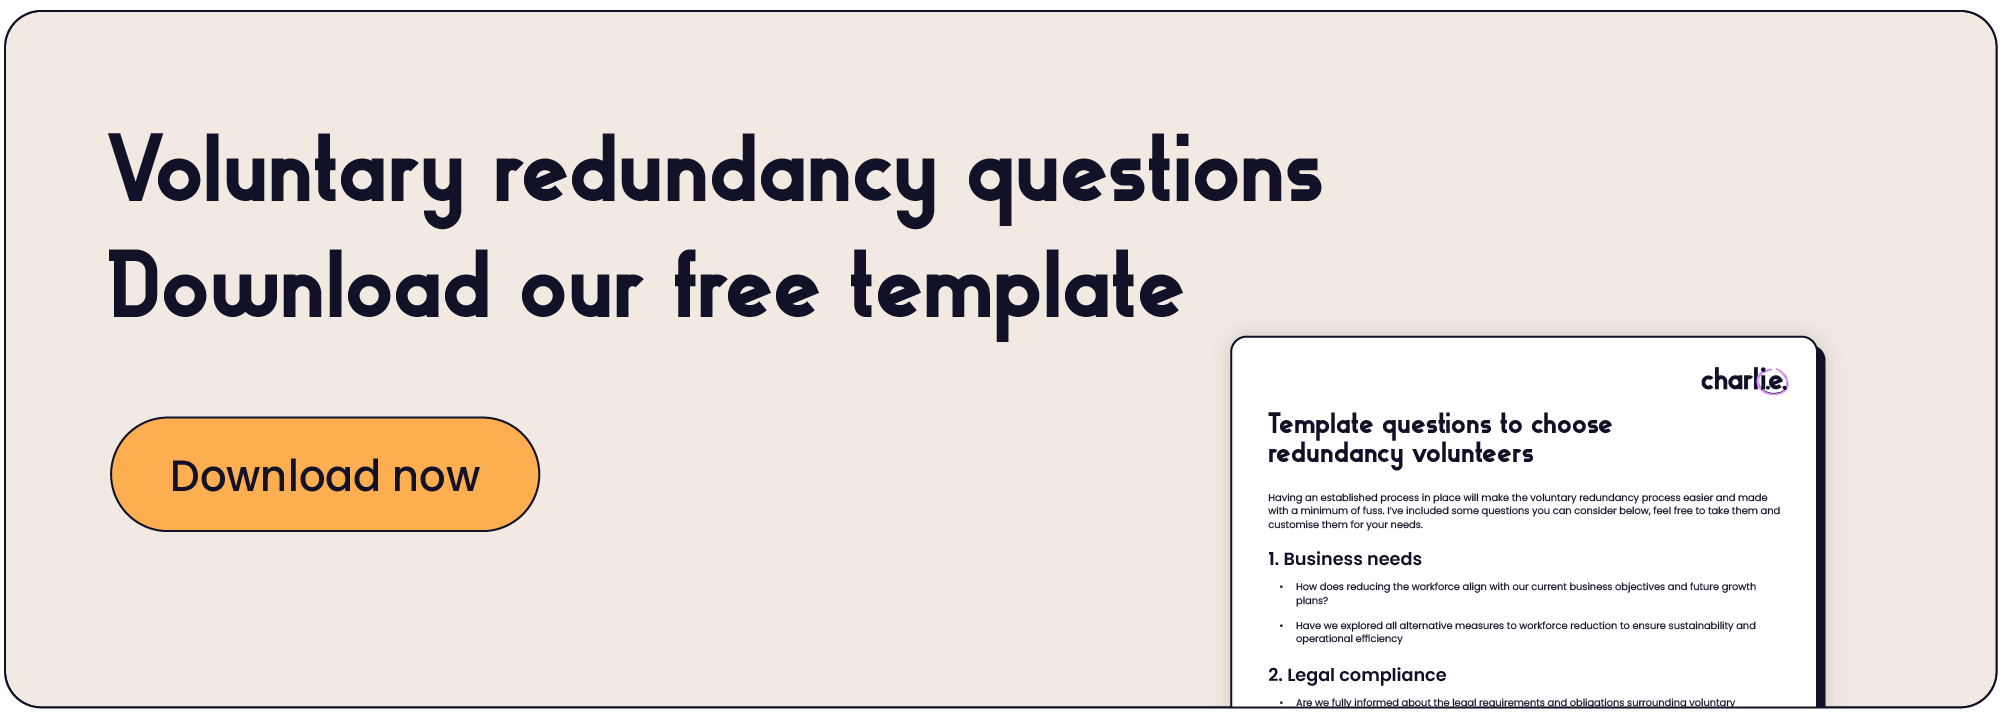 Voluntary redundancies and why you have to make them + free template